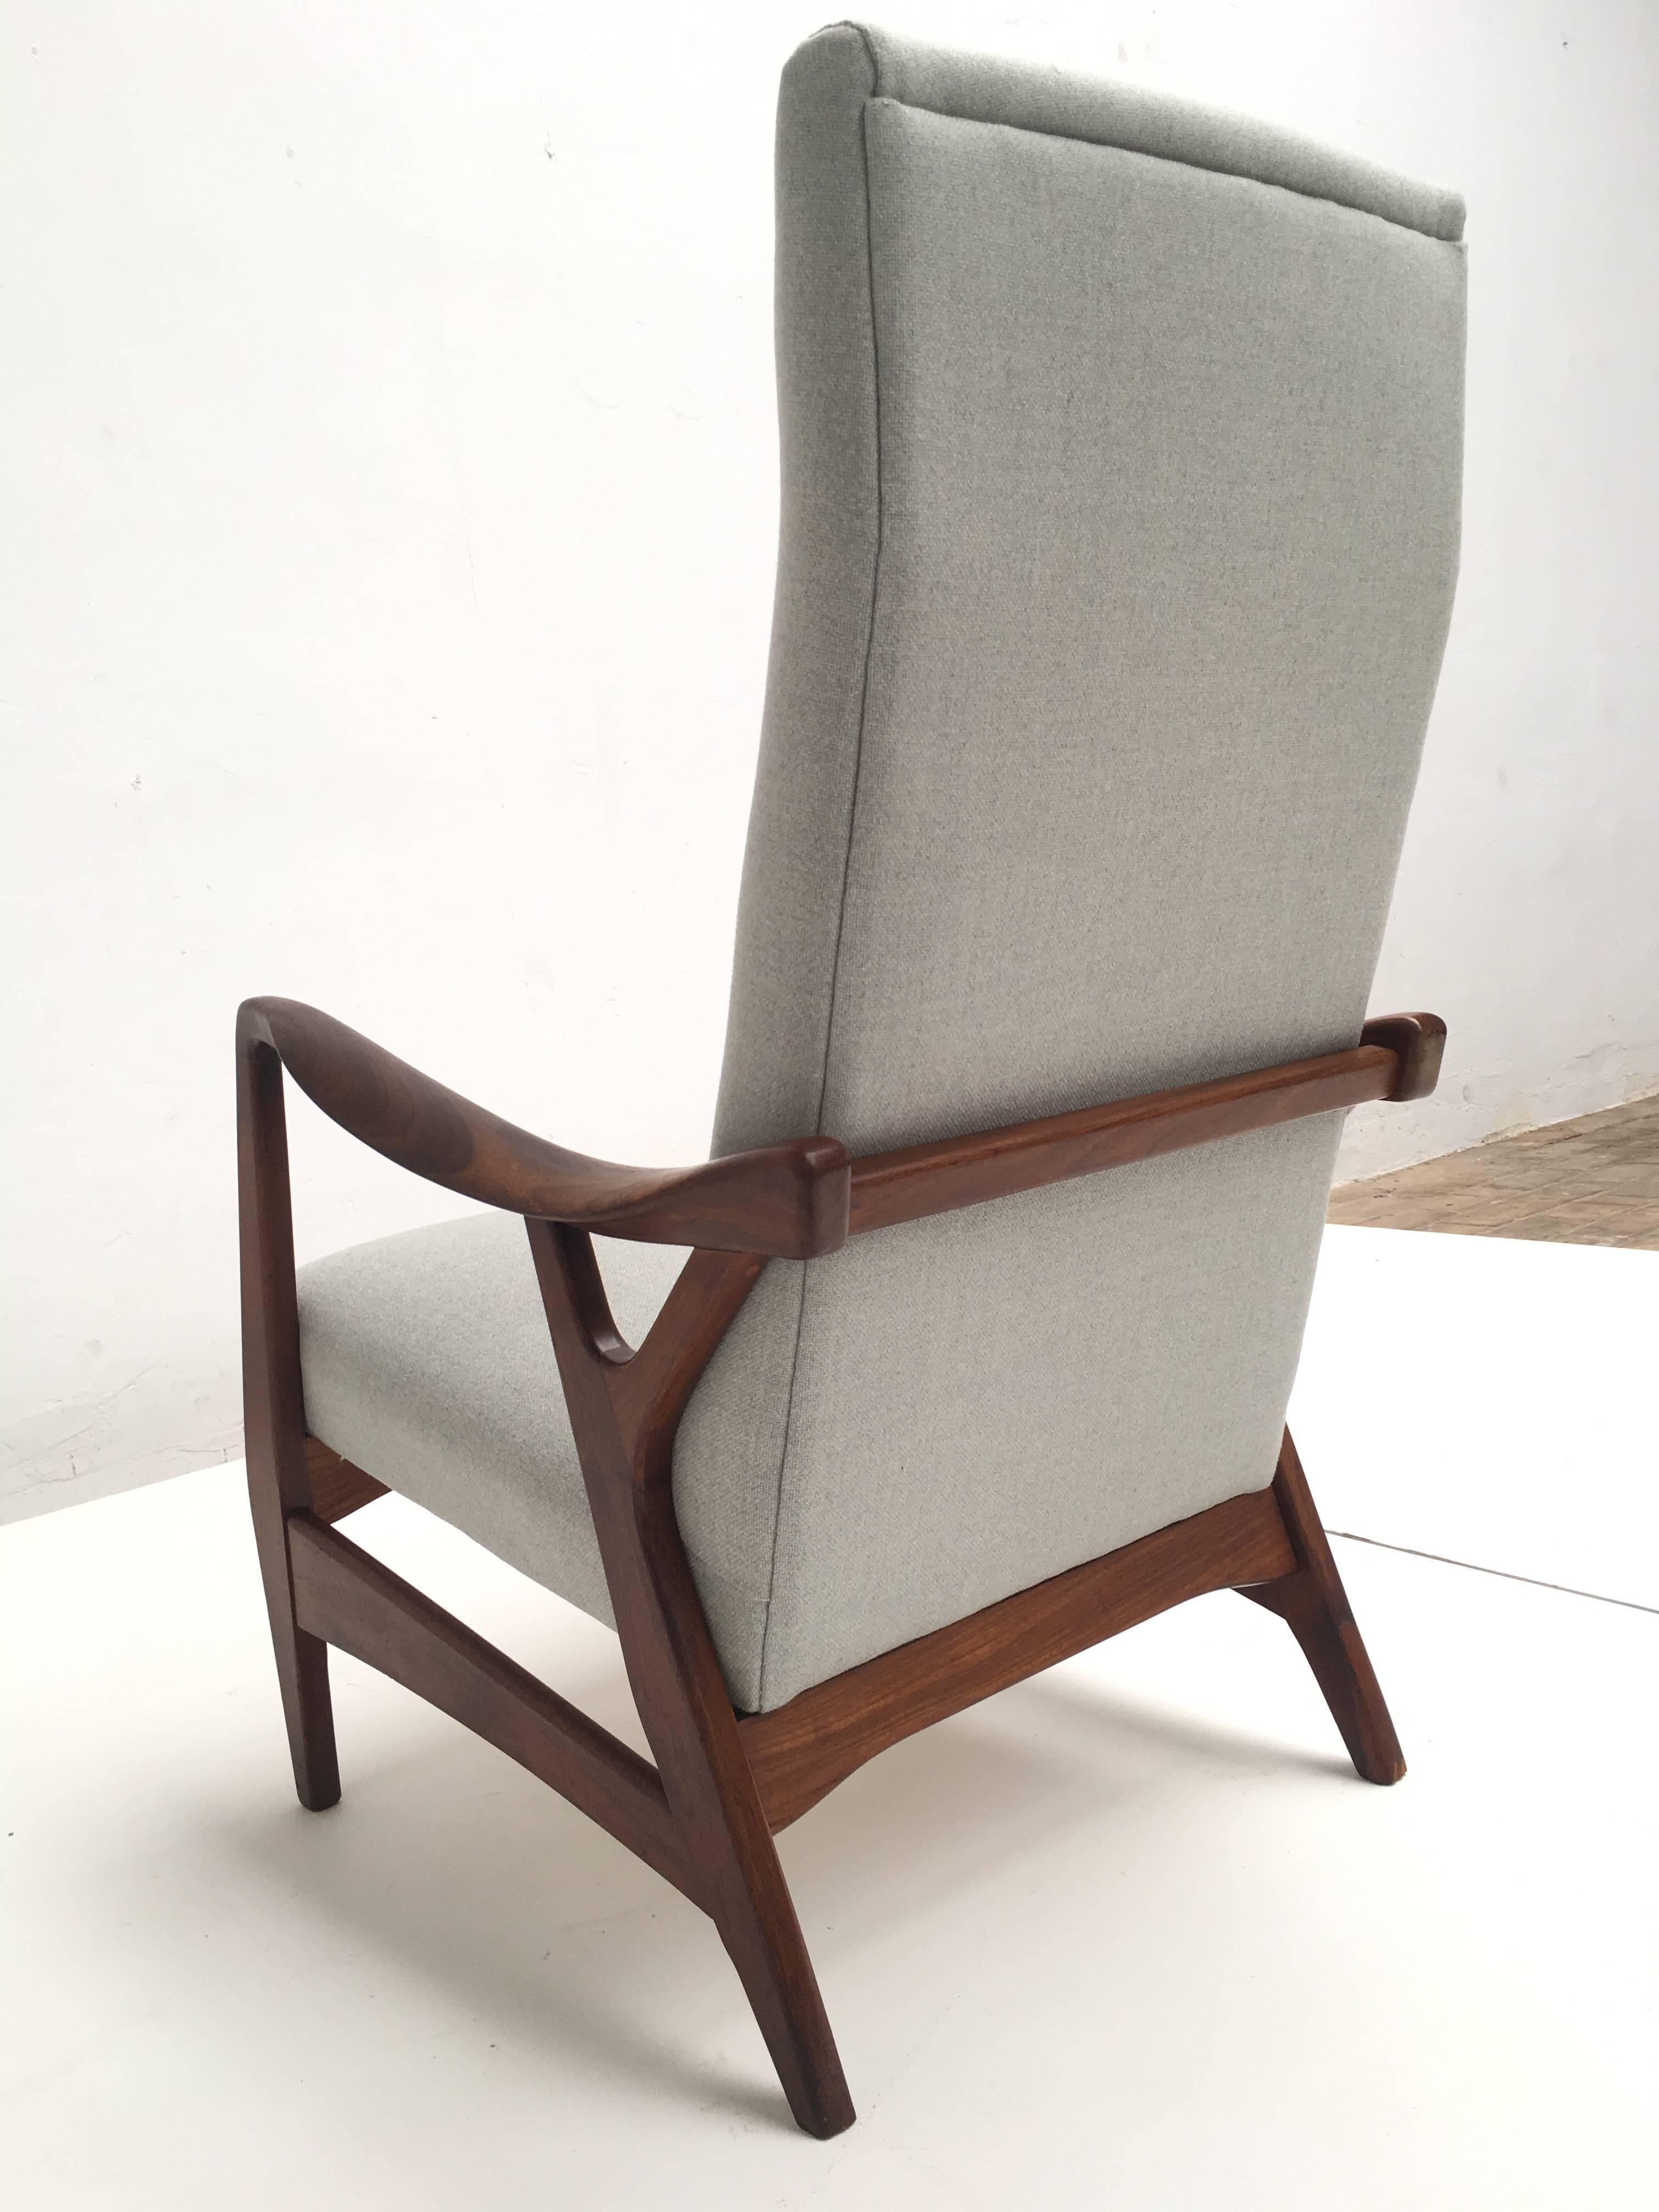 Solid 1950s Carved Teak Danish High back Chair with New De Ploeg Wool Upholstery For Sale 4